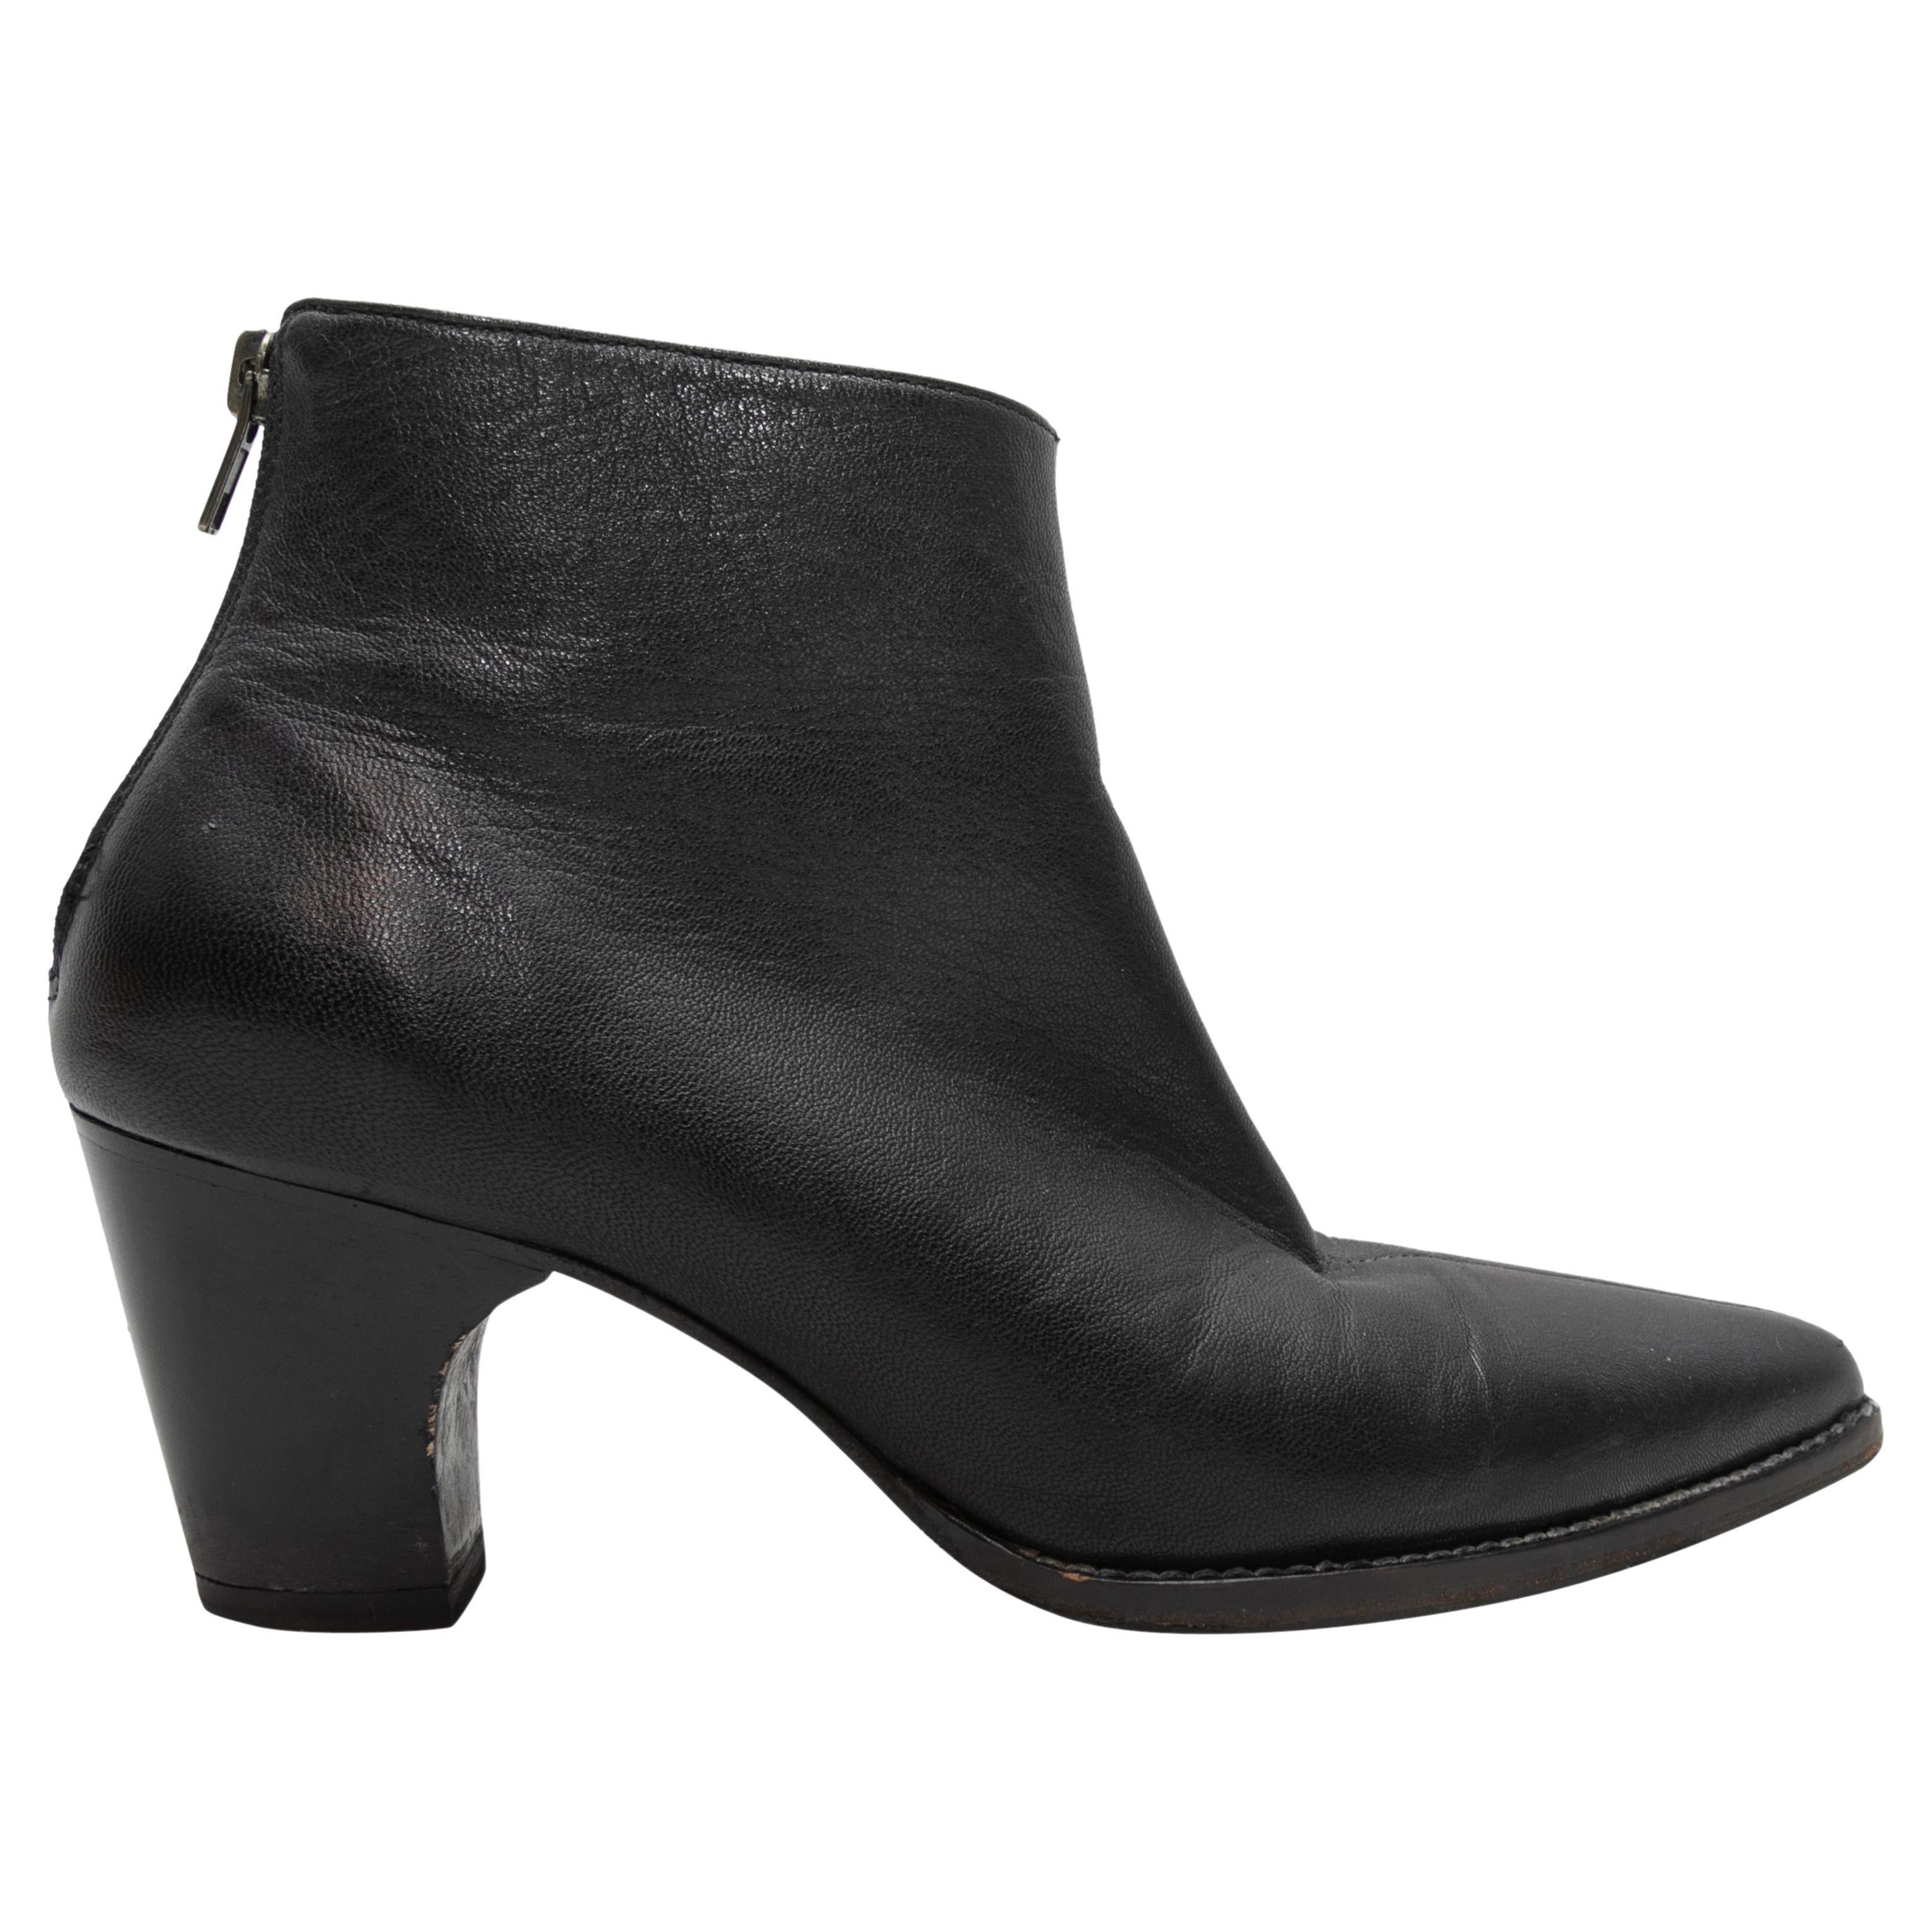 Black Rachel Comey Pointed-Toe Ankle Boots Size 37 For Sale